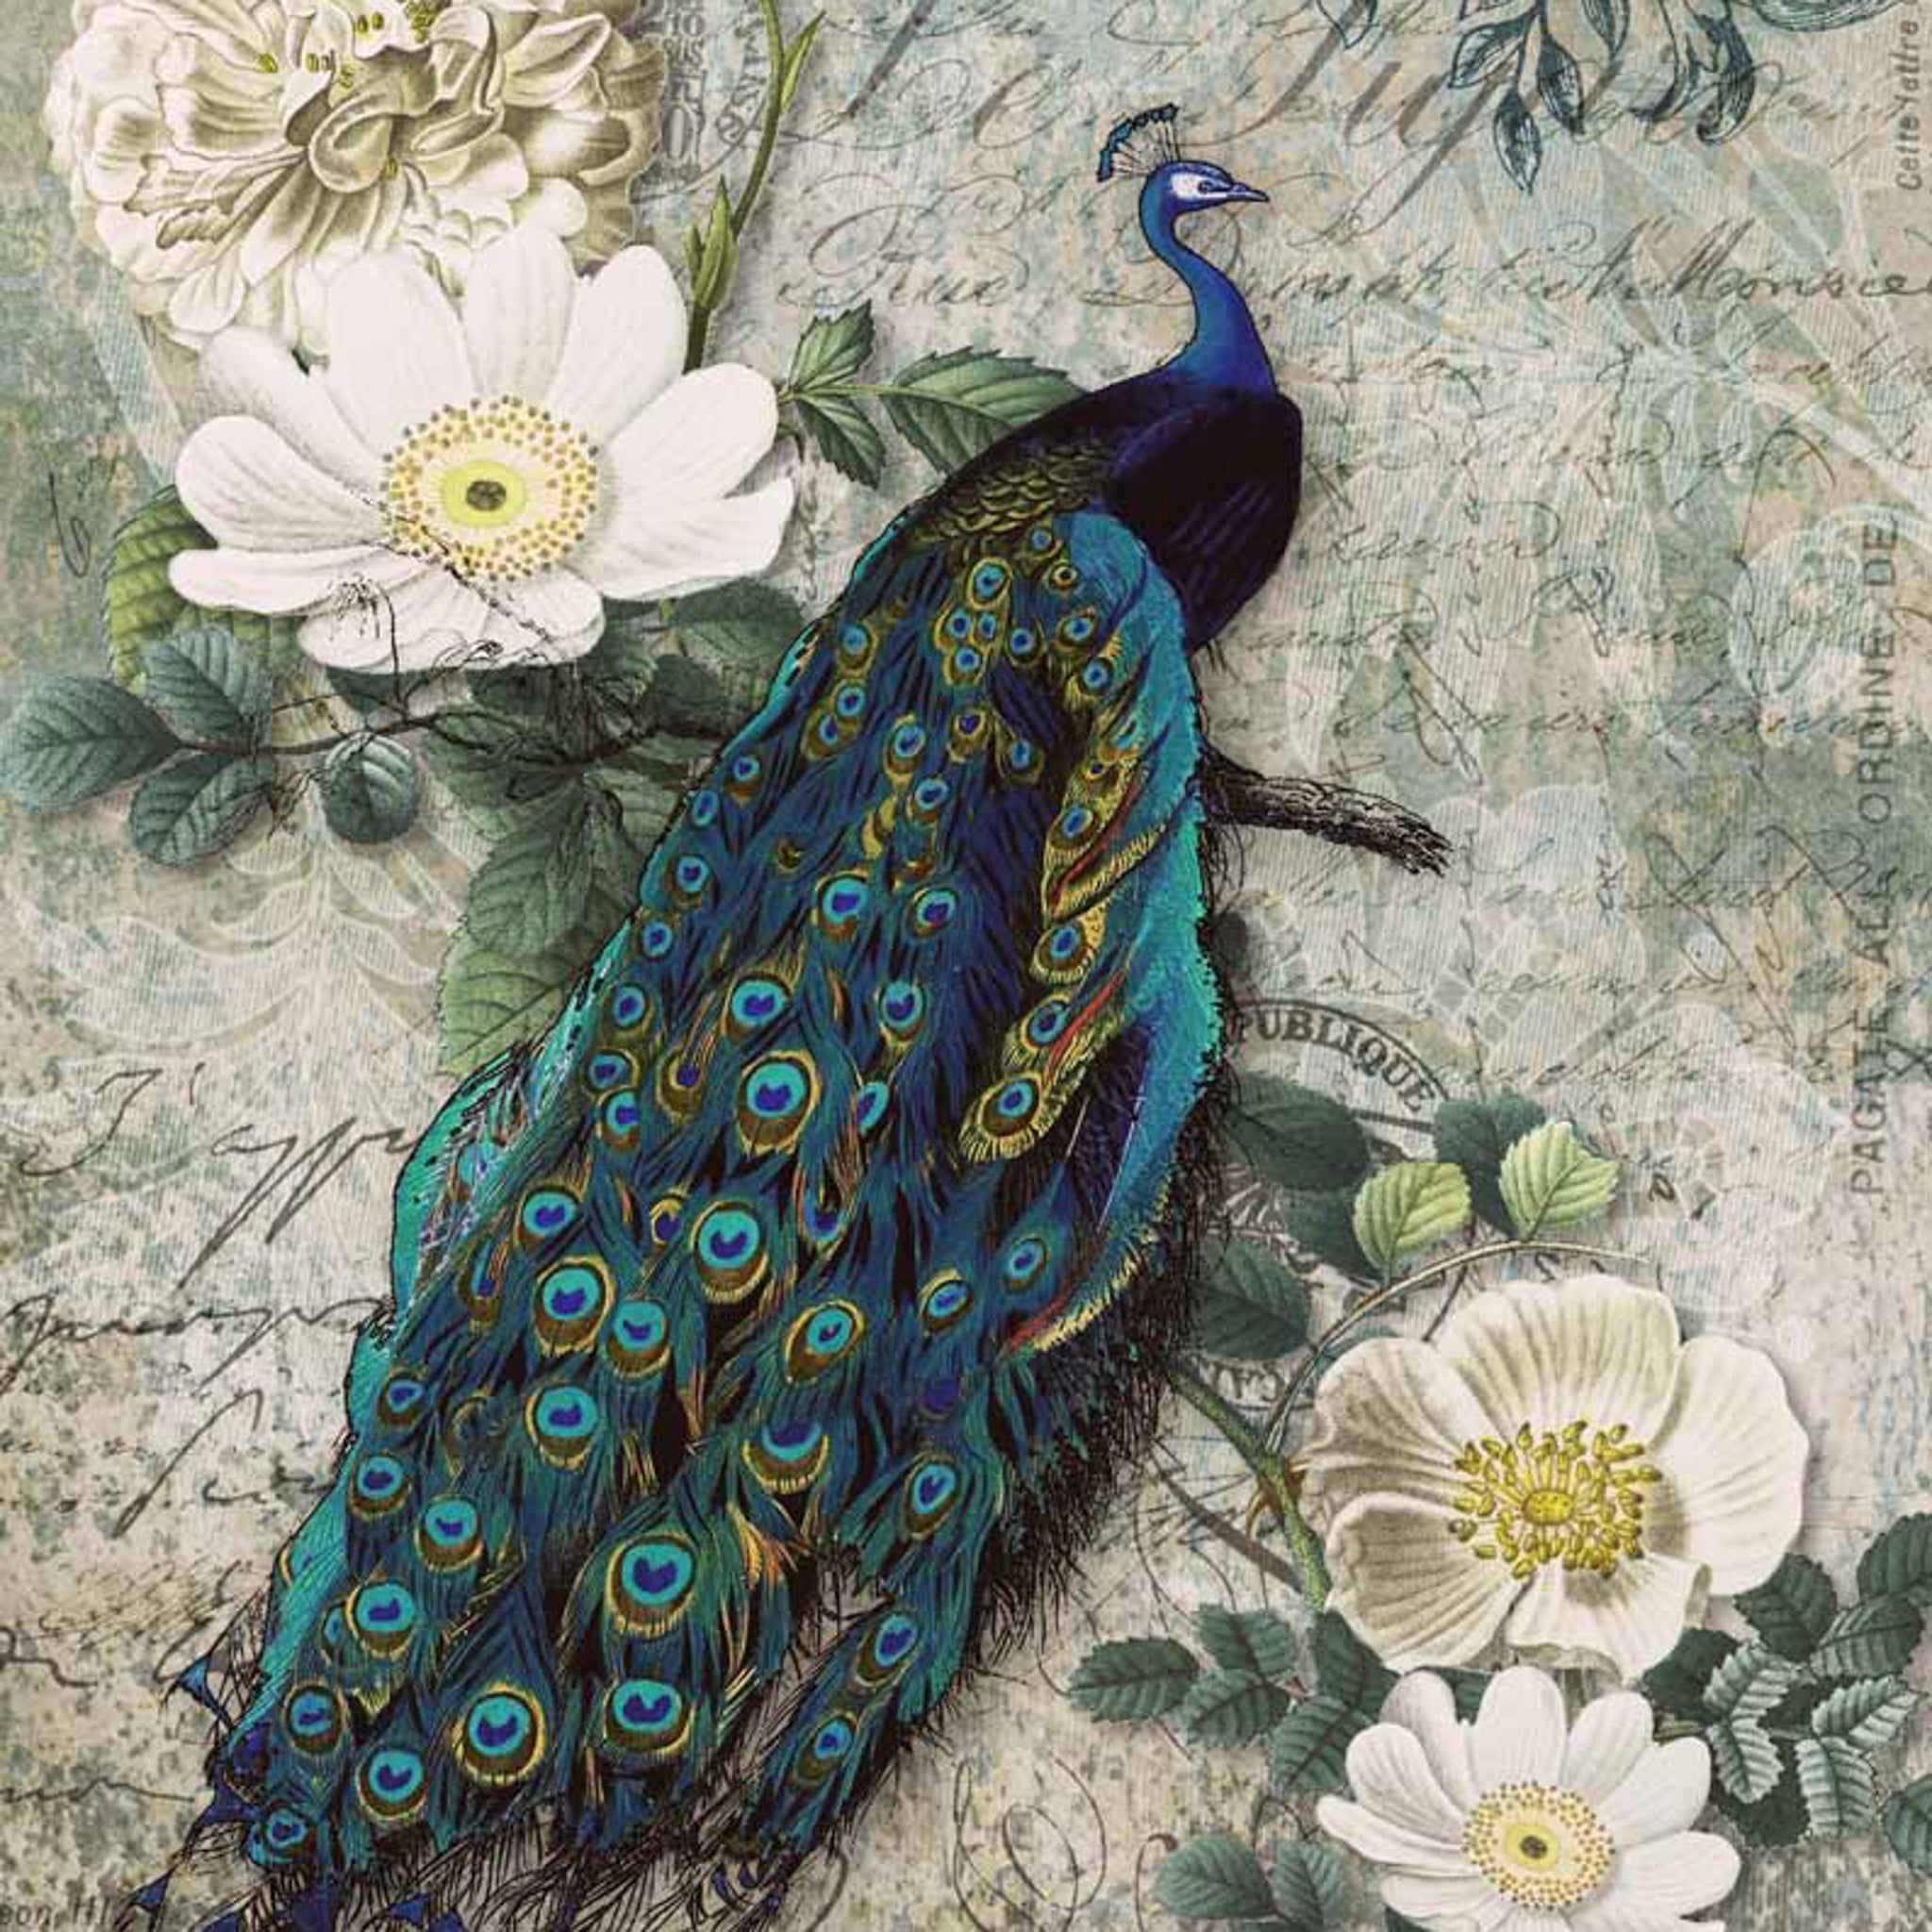 A1 rice paper design that features a large peacock on a branch with green foliage and white flowers against a vintage parchment background with a lace border at the top.